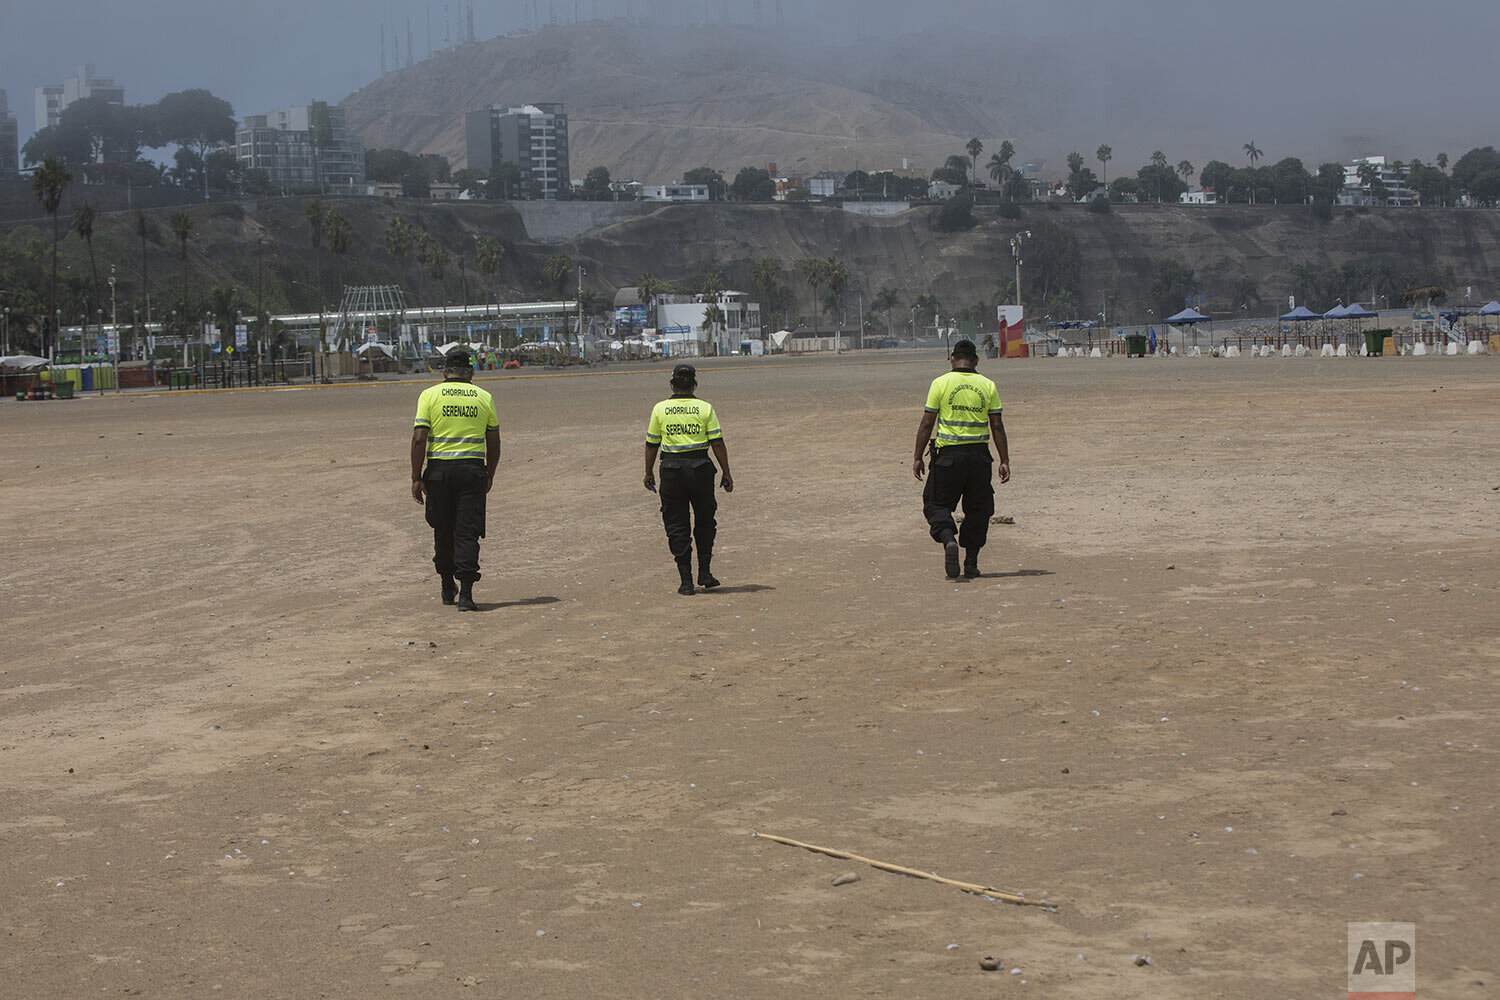  Policemen walk along an empty shore on the final days of the Southern Hemisphere summer to warn off would be swimmers as a precaution to contain the spread of the new coronavirus, at Agua Dulce beach in Lima, Peru, March 24, 2020. (AP Photo/Rodrigo 